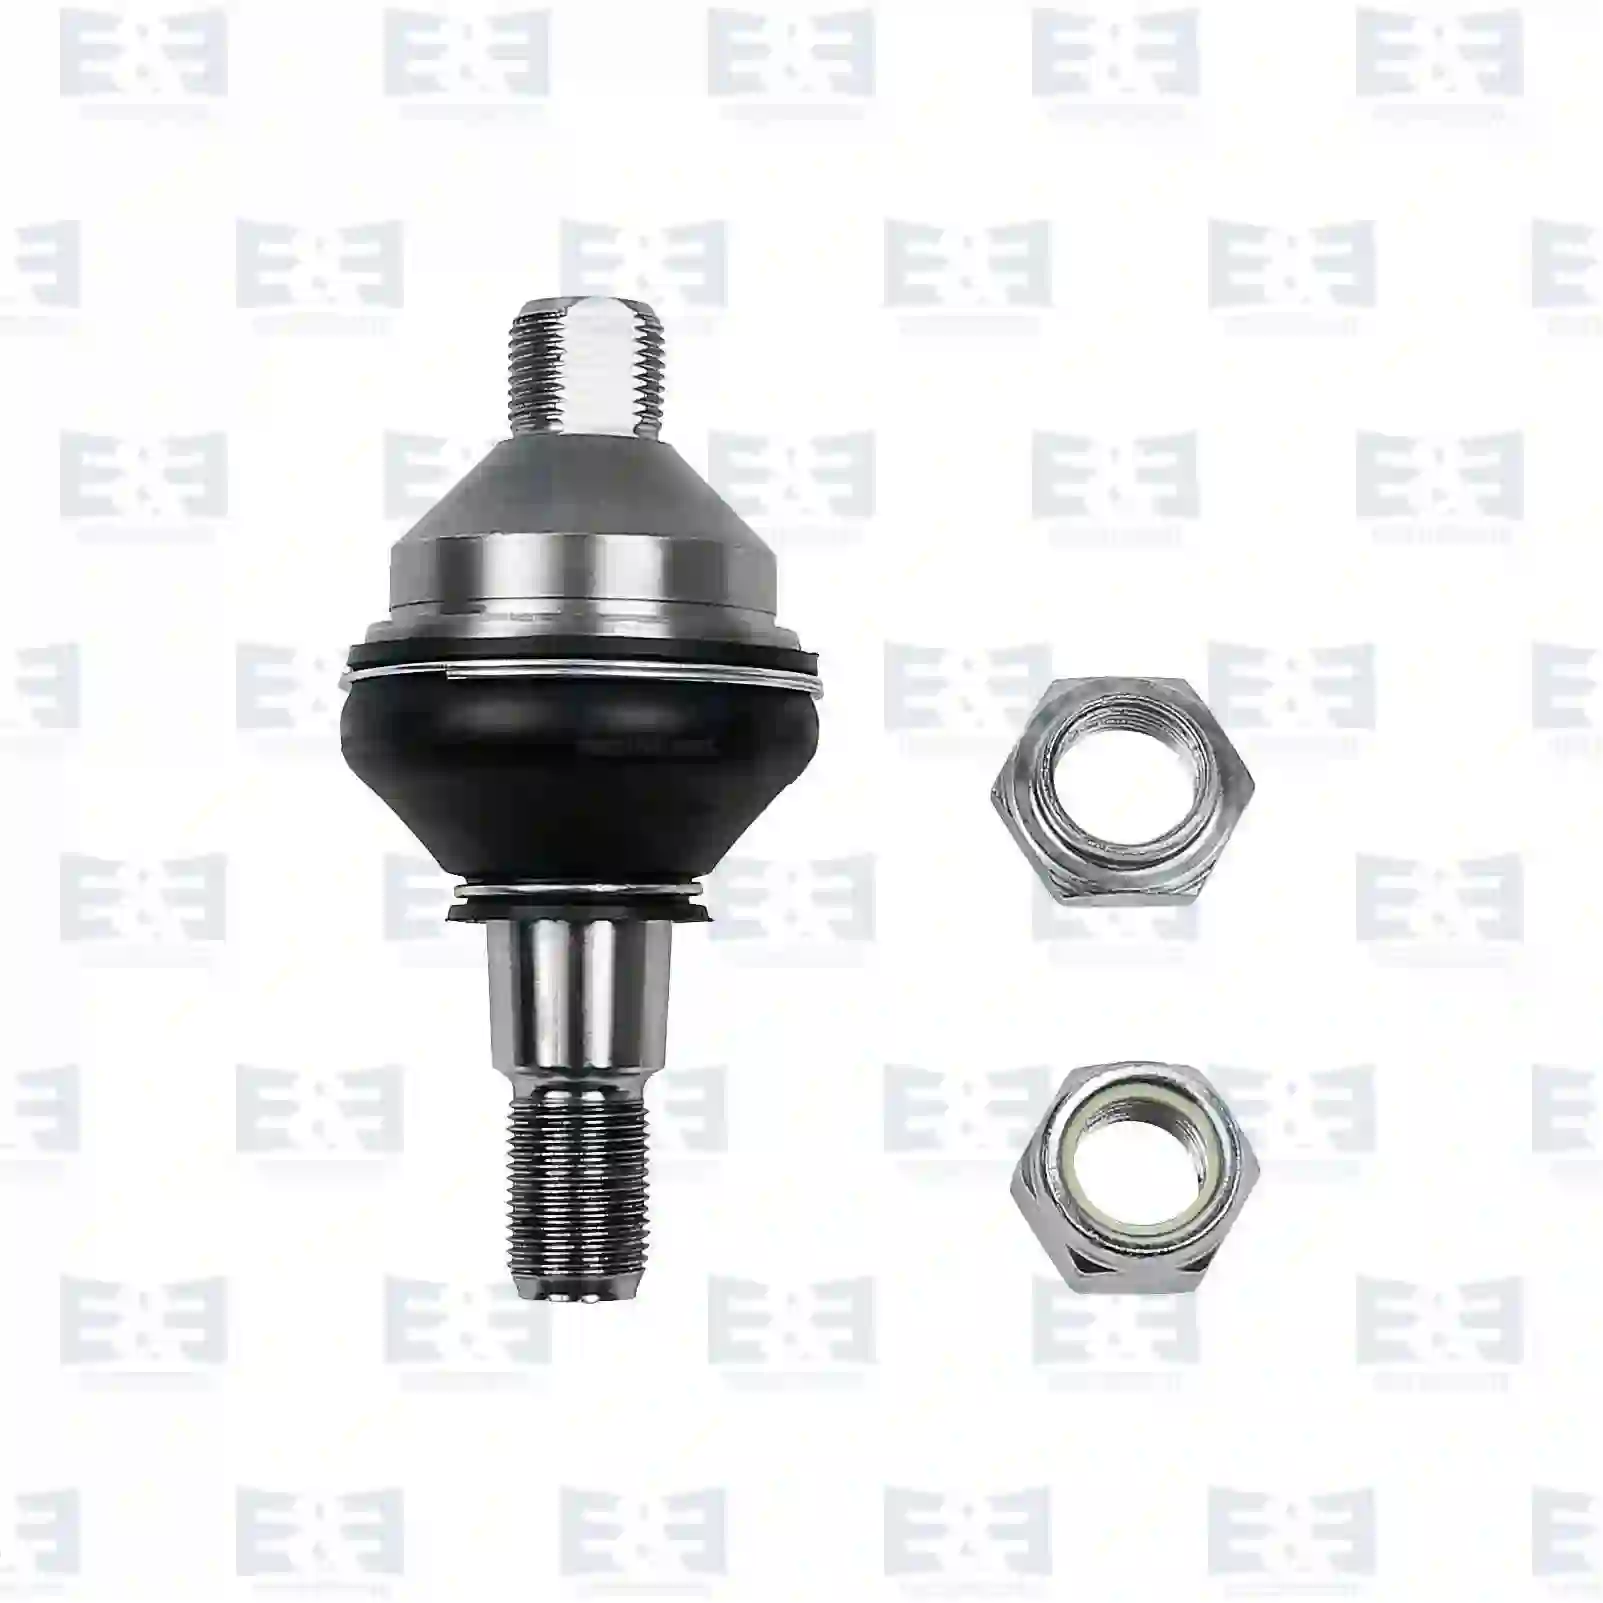 Control Arm Ball joint, right hand thread, EE No 2E2279842 ,  oem no:360828, 93802242, 93804061, 93807320, 93807542, 93807545, 03302242, 93802242, 93807320, 93807545, 360828, ZG40410-0008 E&E Truck Spare Parts | Truck Spare Parts, Auotomotive Spare Parts